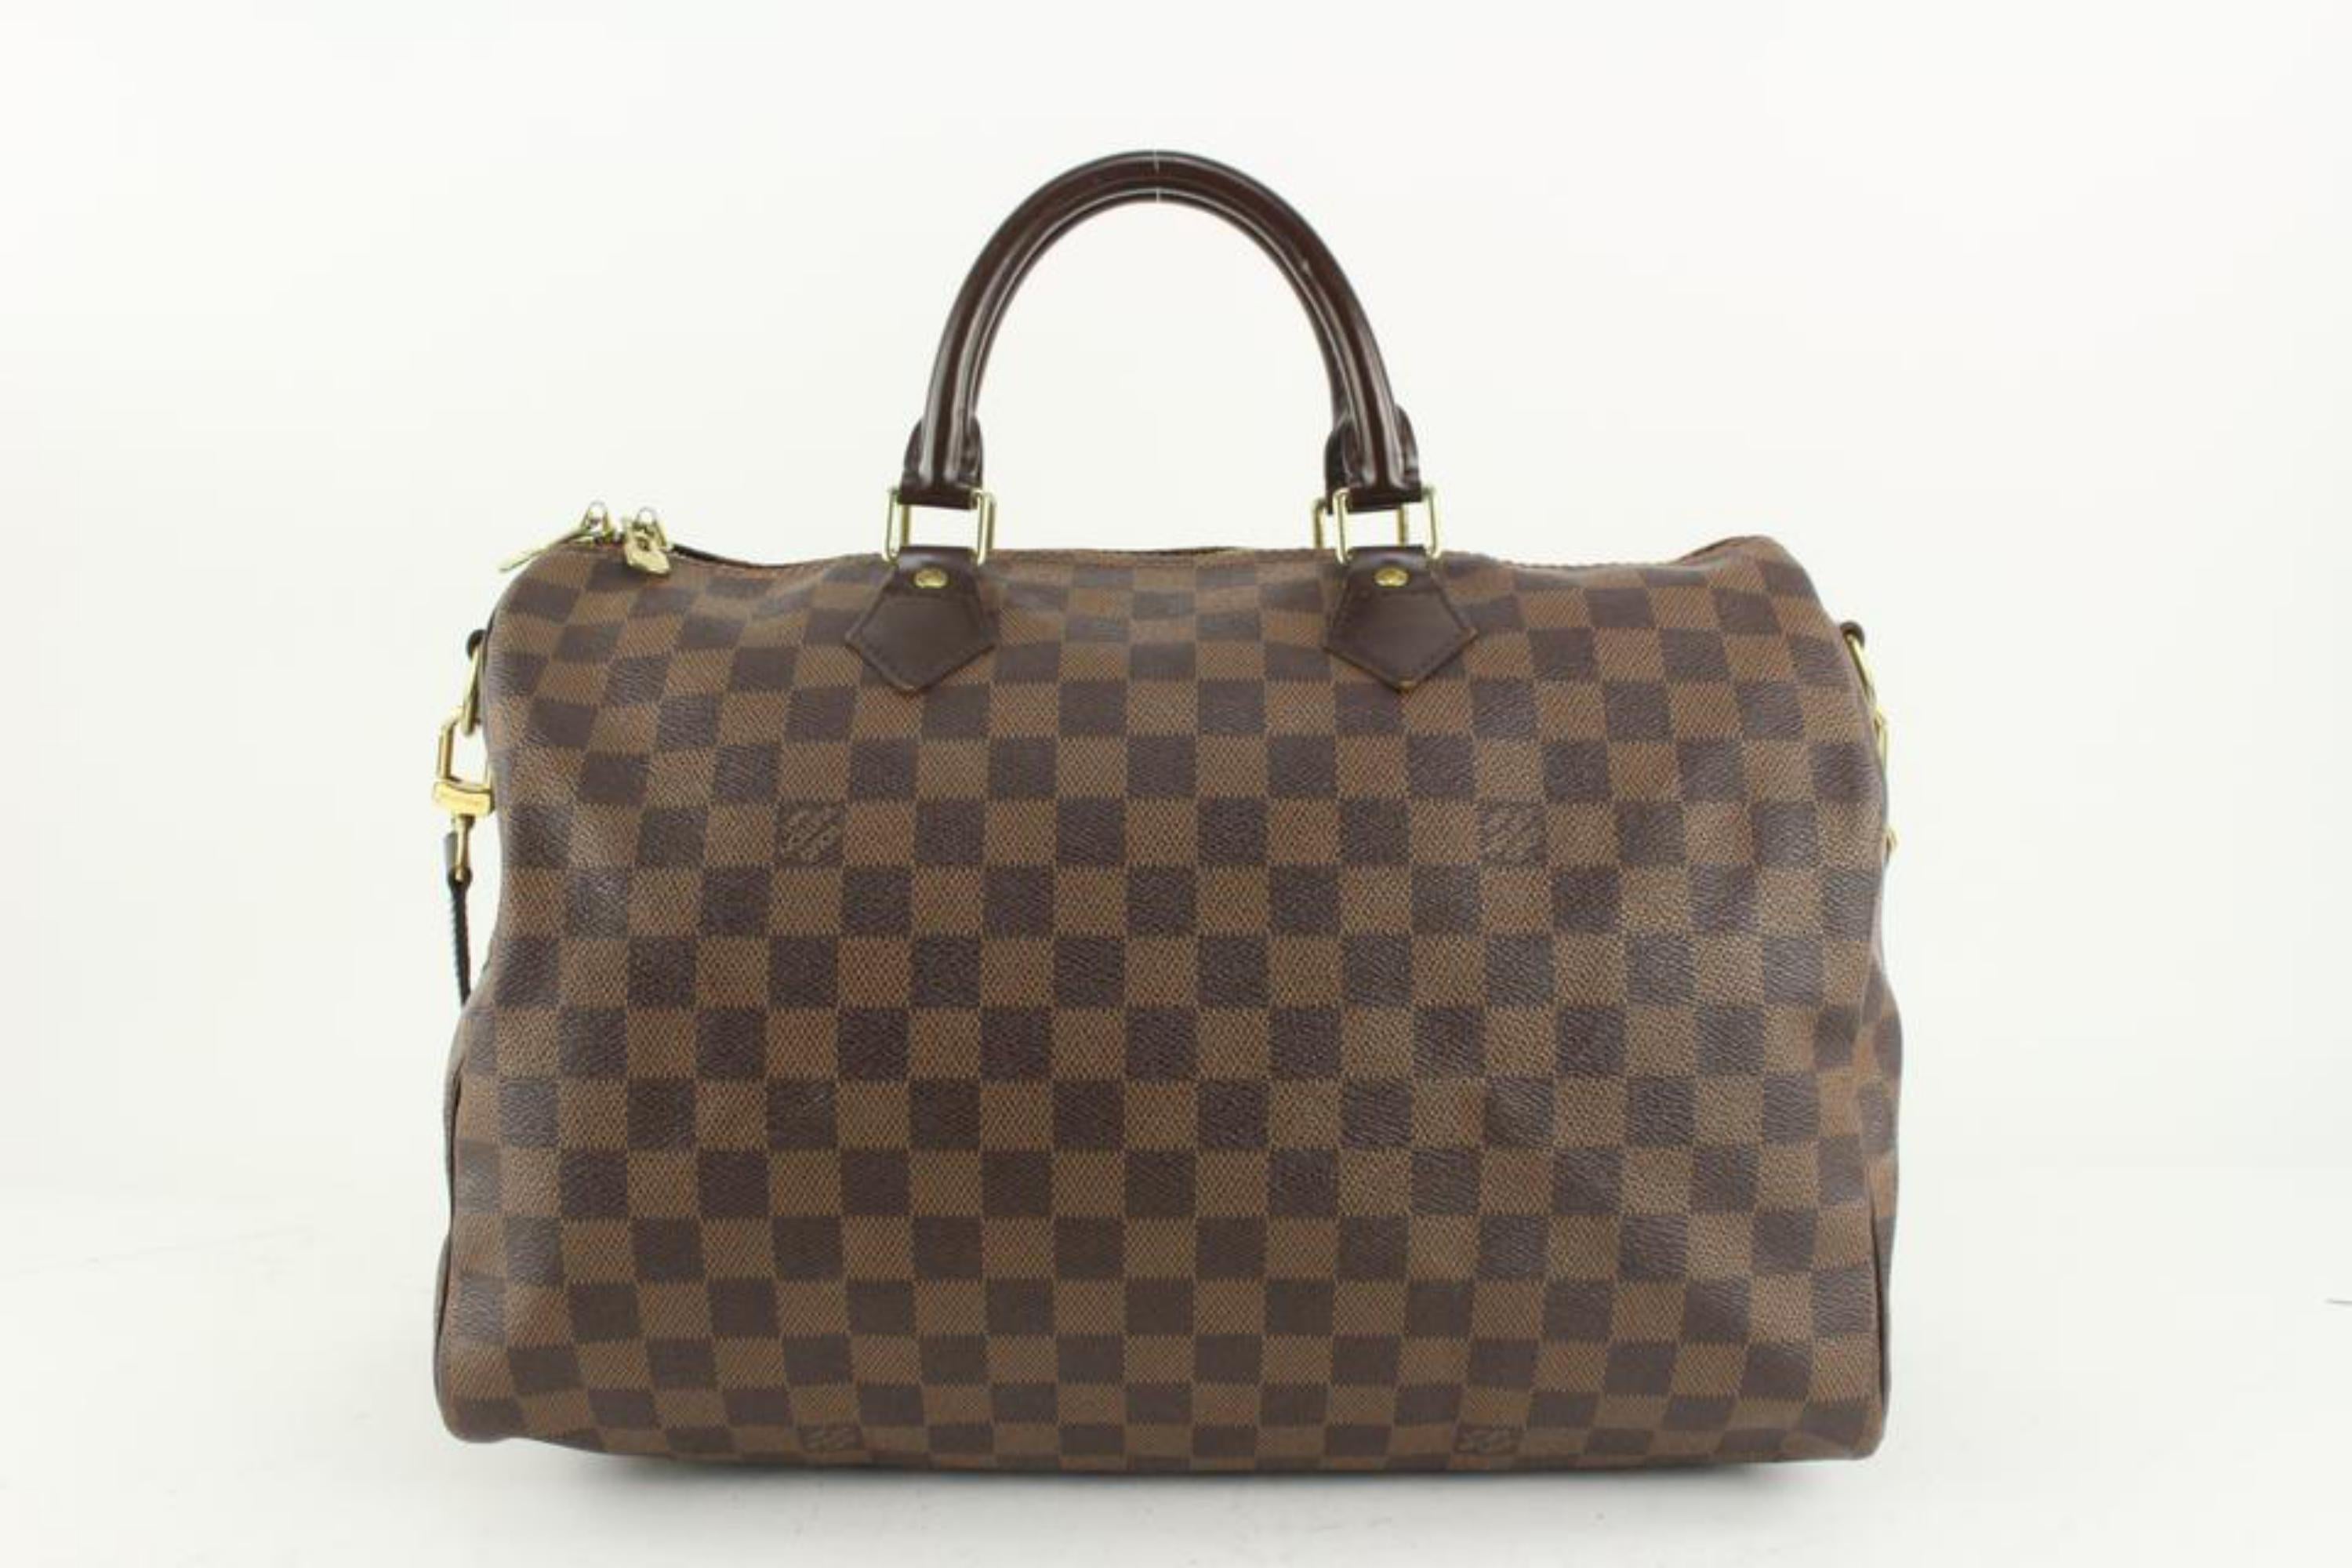 Louis Vuitton Damier Ebene Speedy Bandouliere 35 with Strap 112lv21 For Sale 4